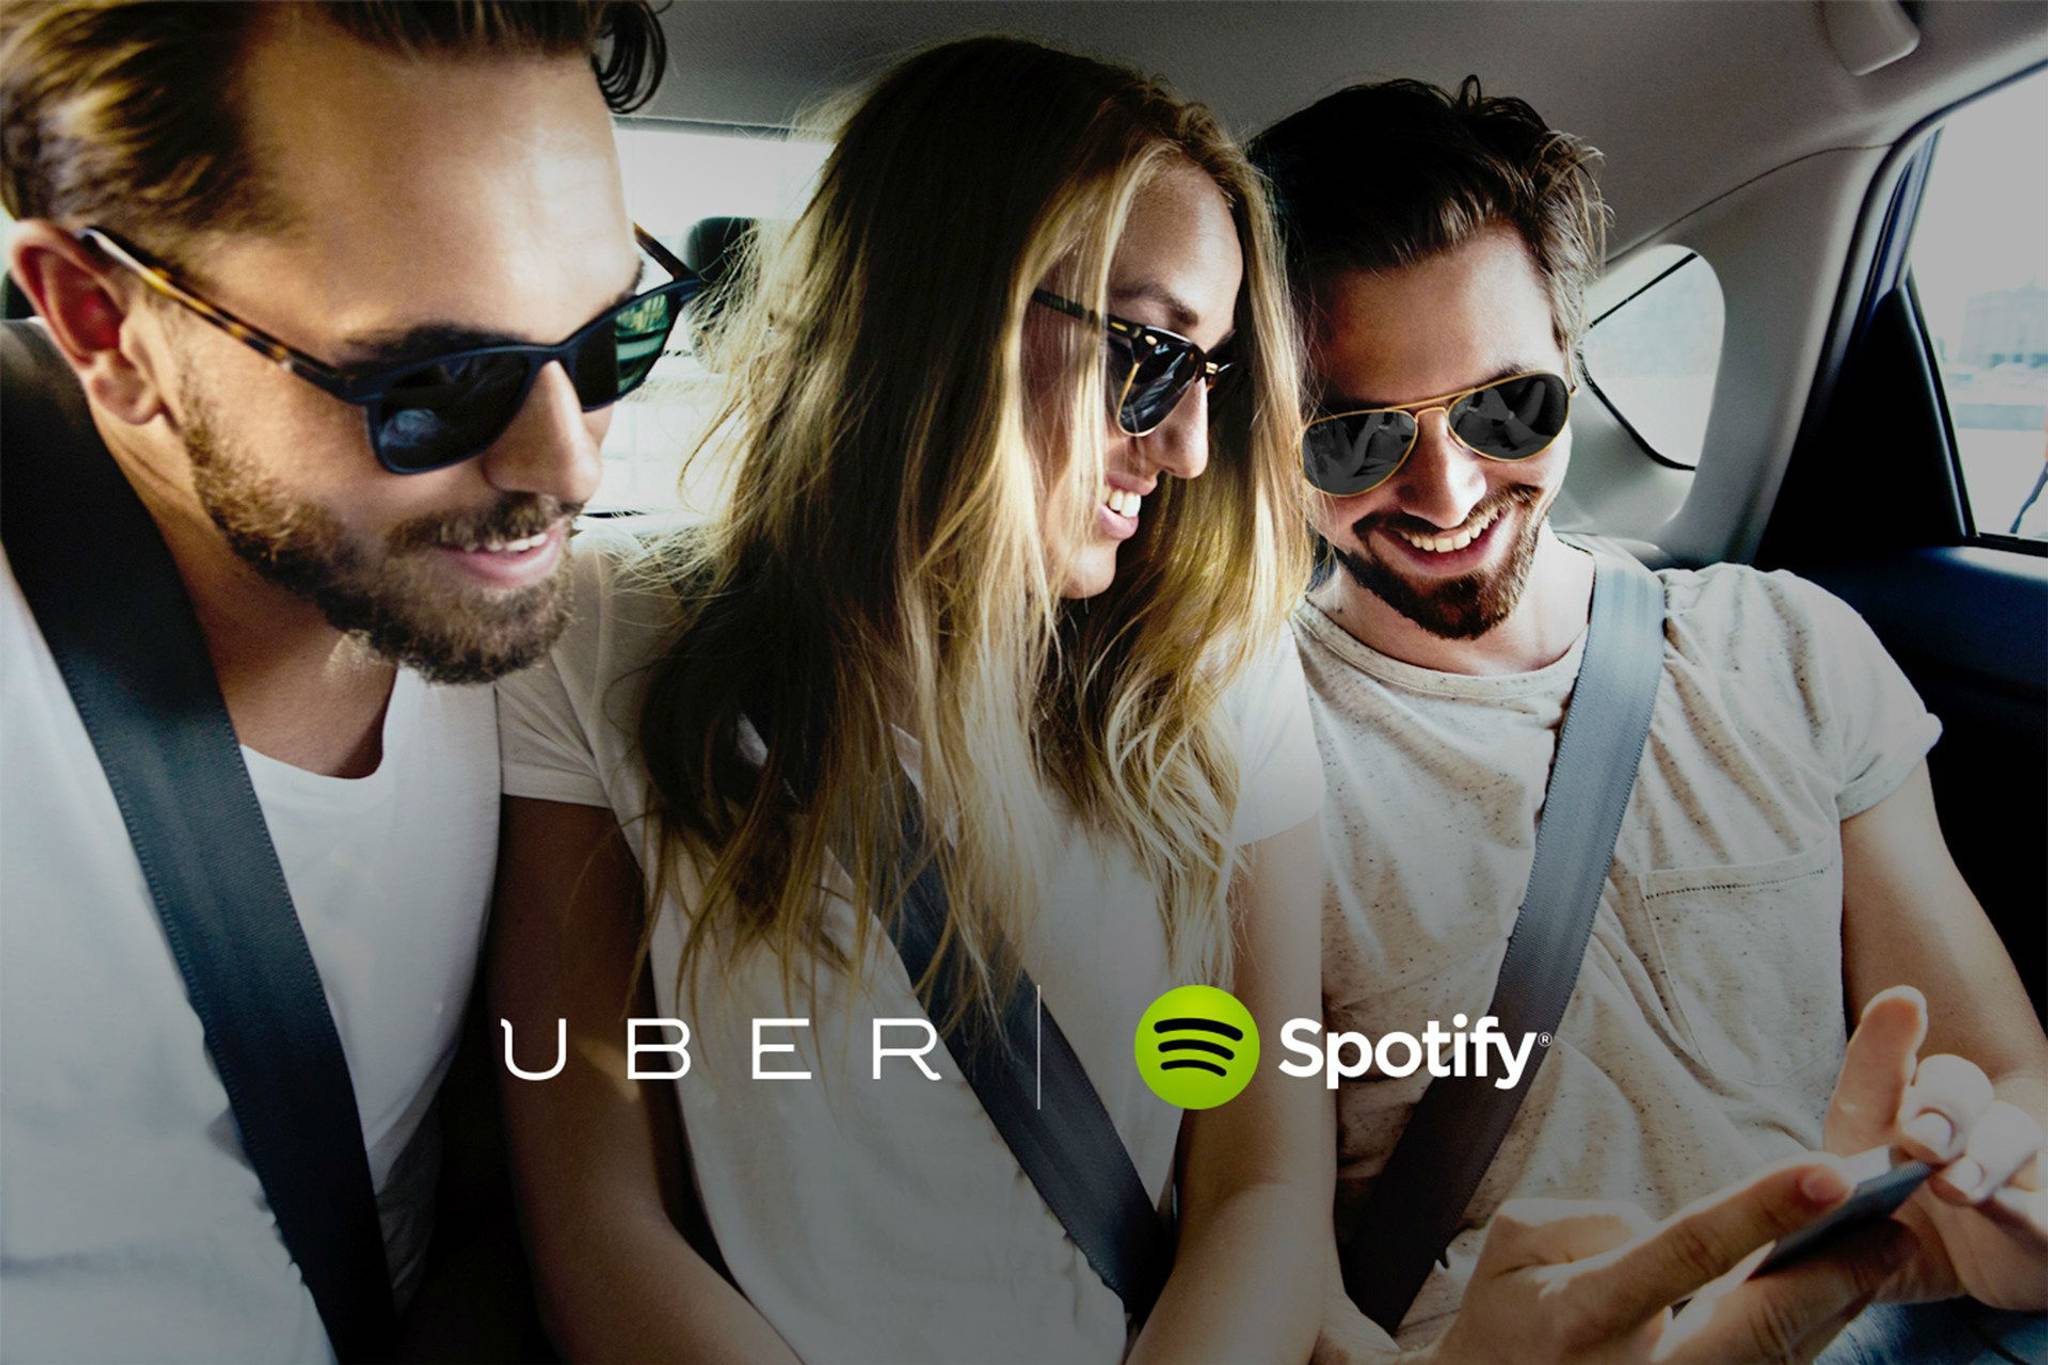 Spotify and Uber: delivering spontaneous evenings out